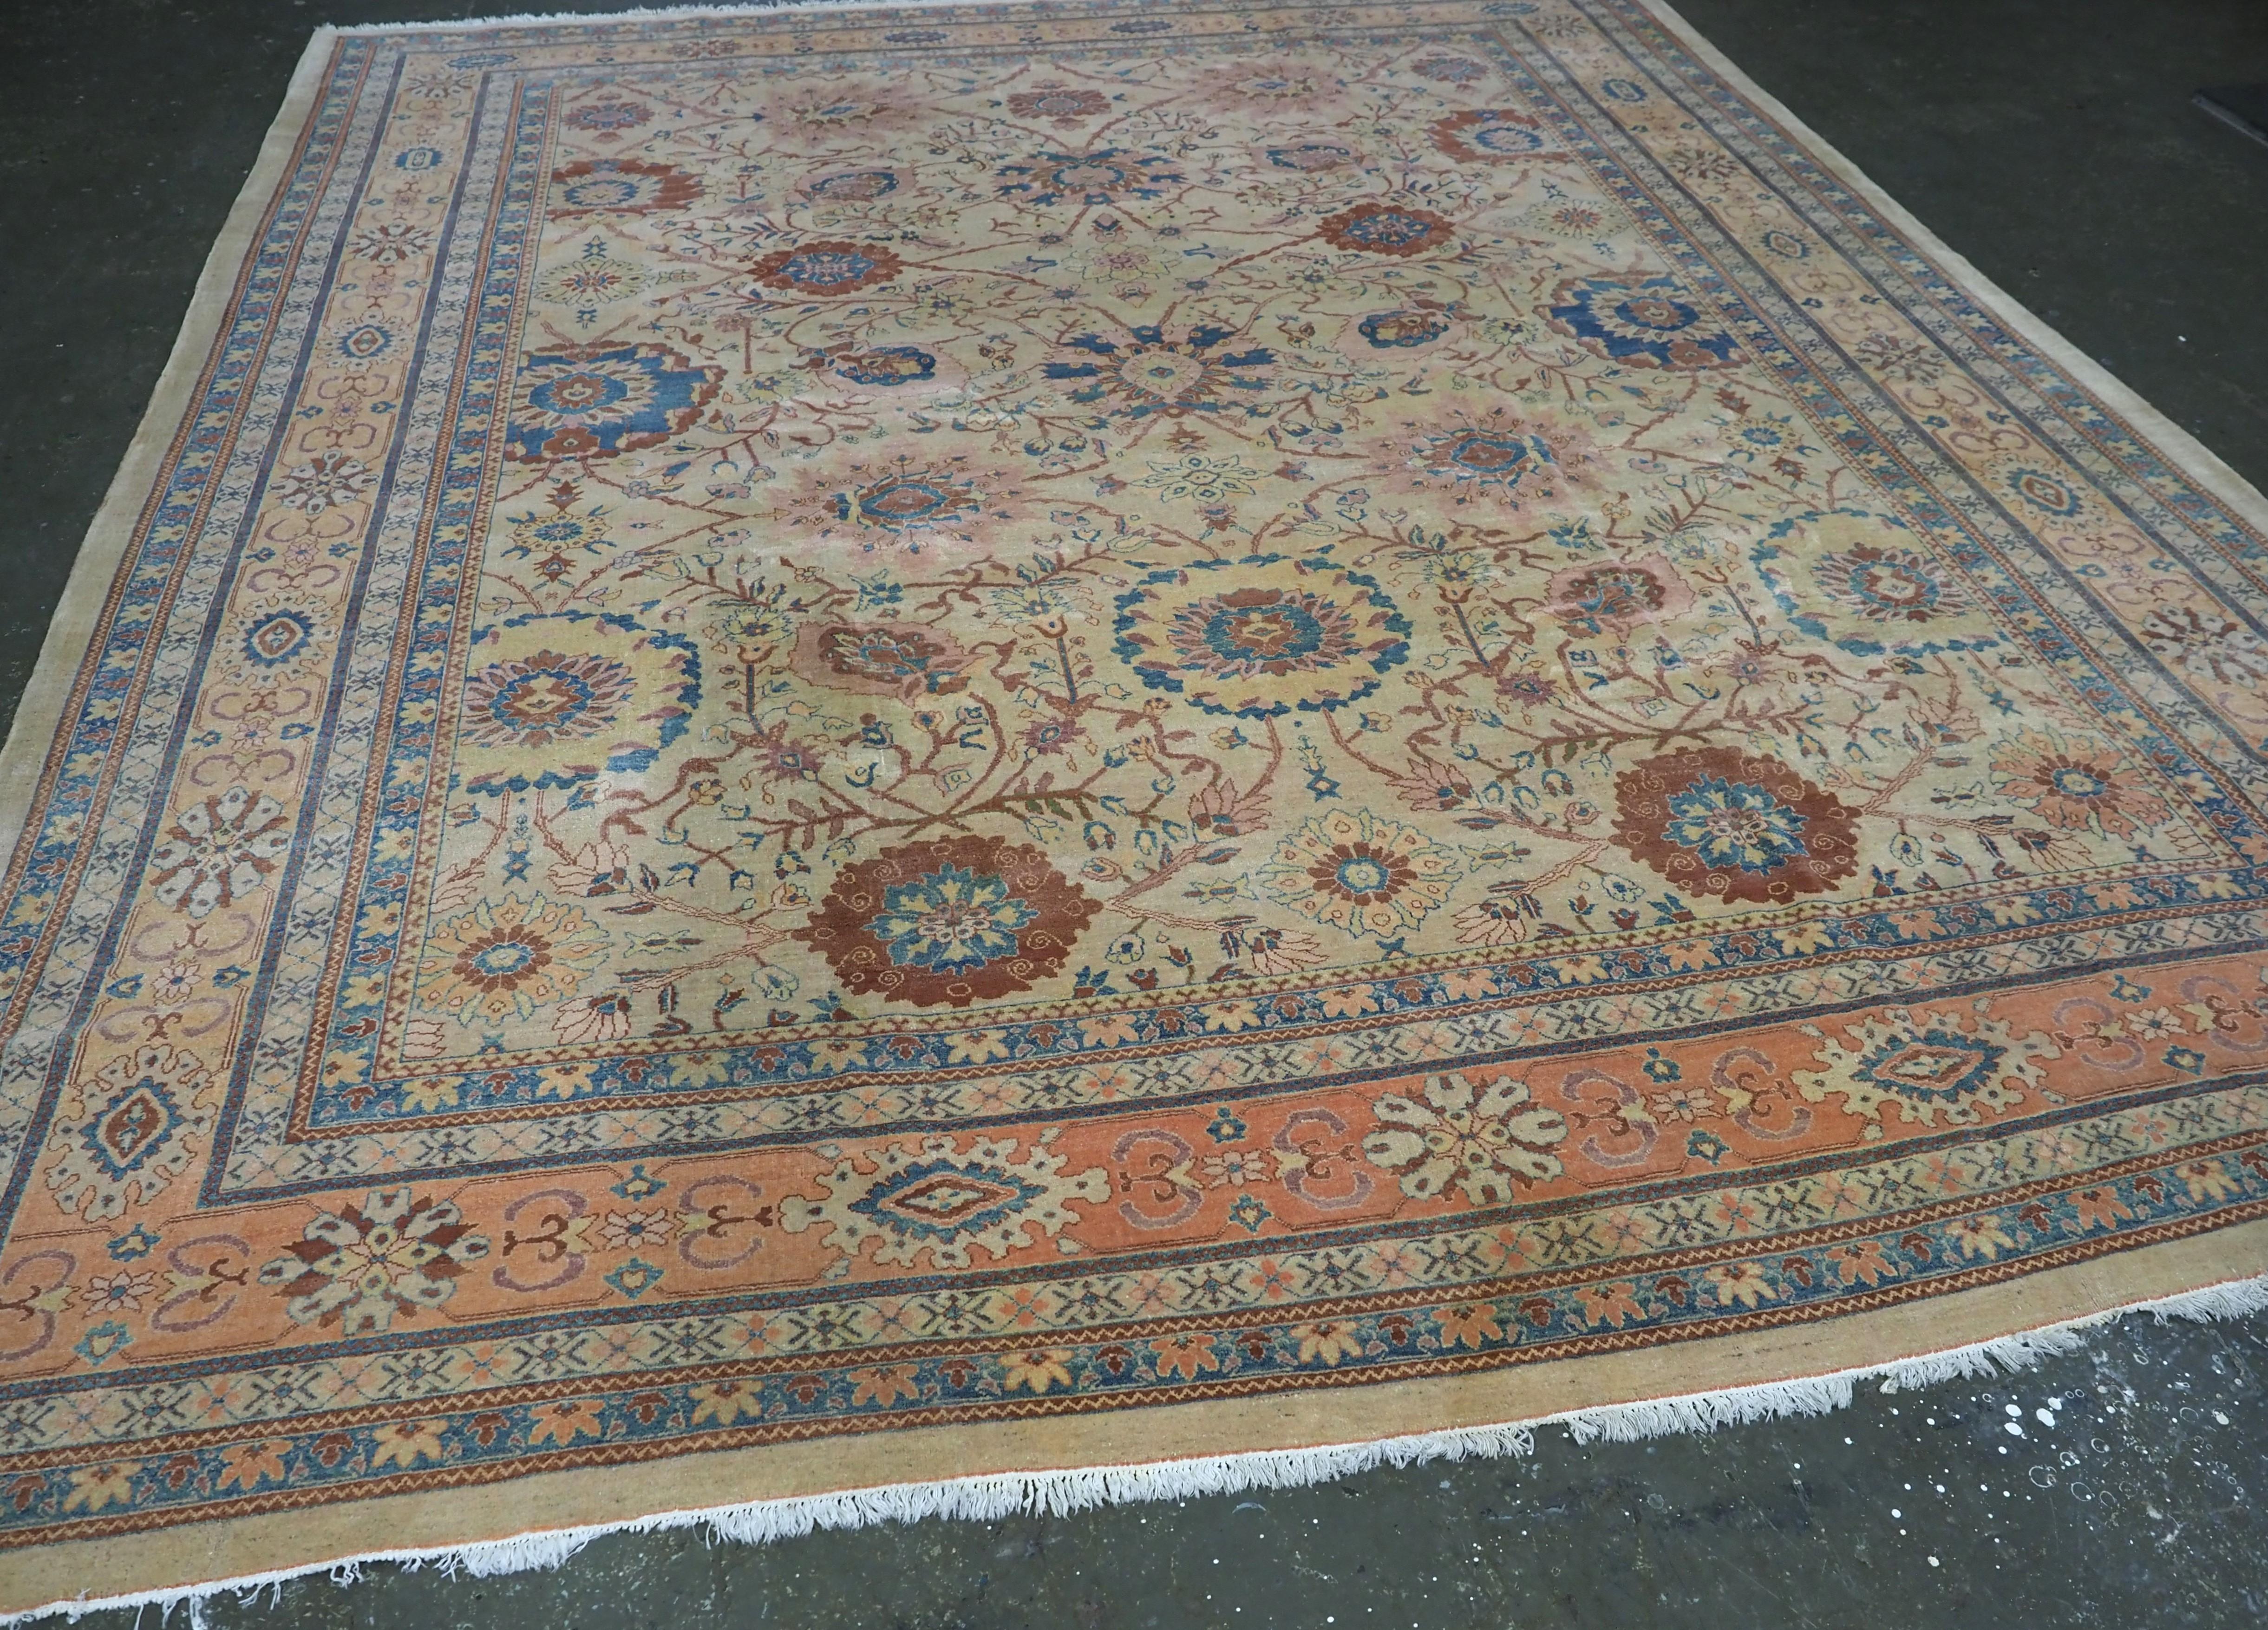 Size: 12ft 7in x 10ft 8in. (383x 325cm)

An excellent example of a vintage Ziegler design carpet in a soft colour palette.

About 30 years old.

The carpet is hand woven with a pleasing Persian floral vase design inspired by 17th century Kirman vase